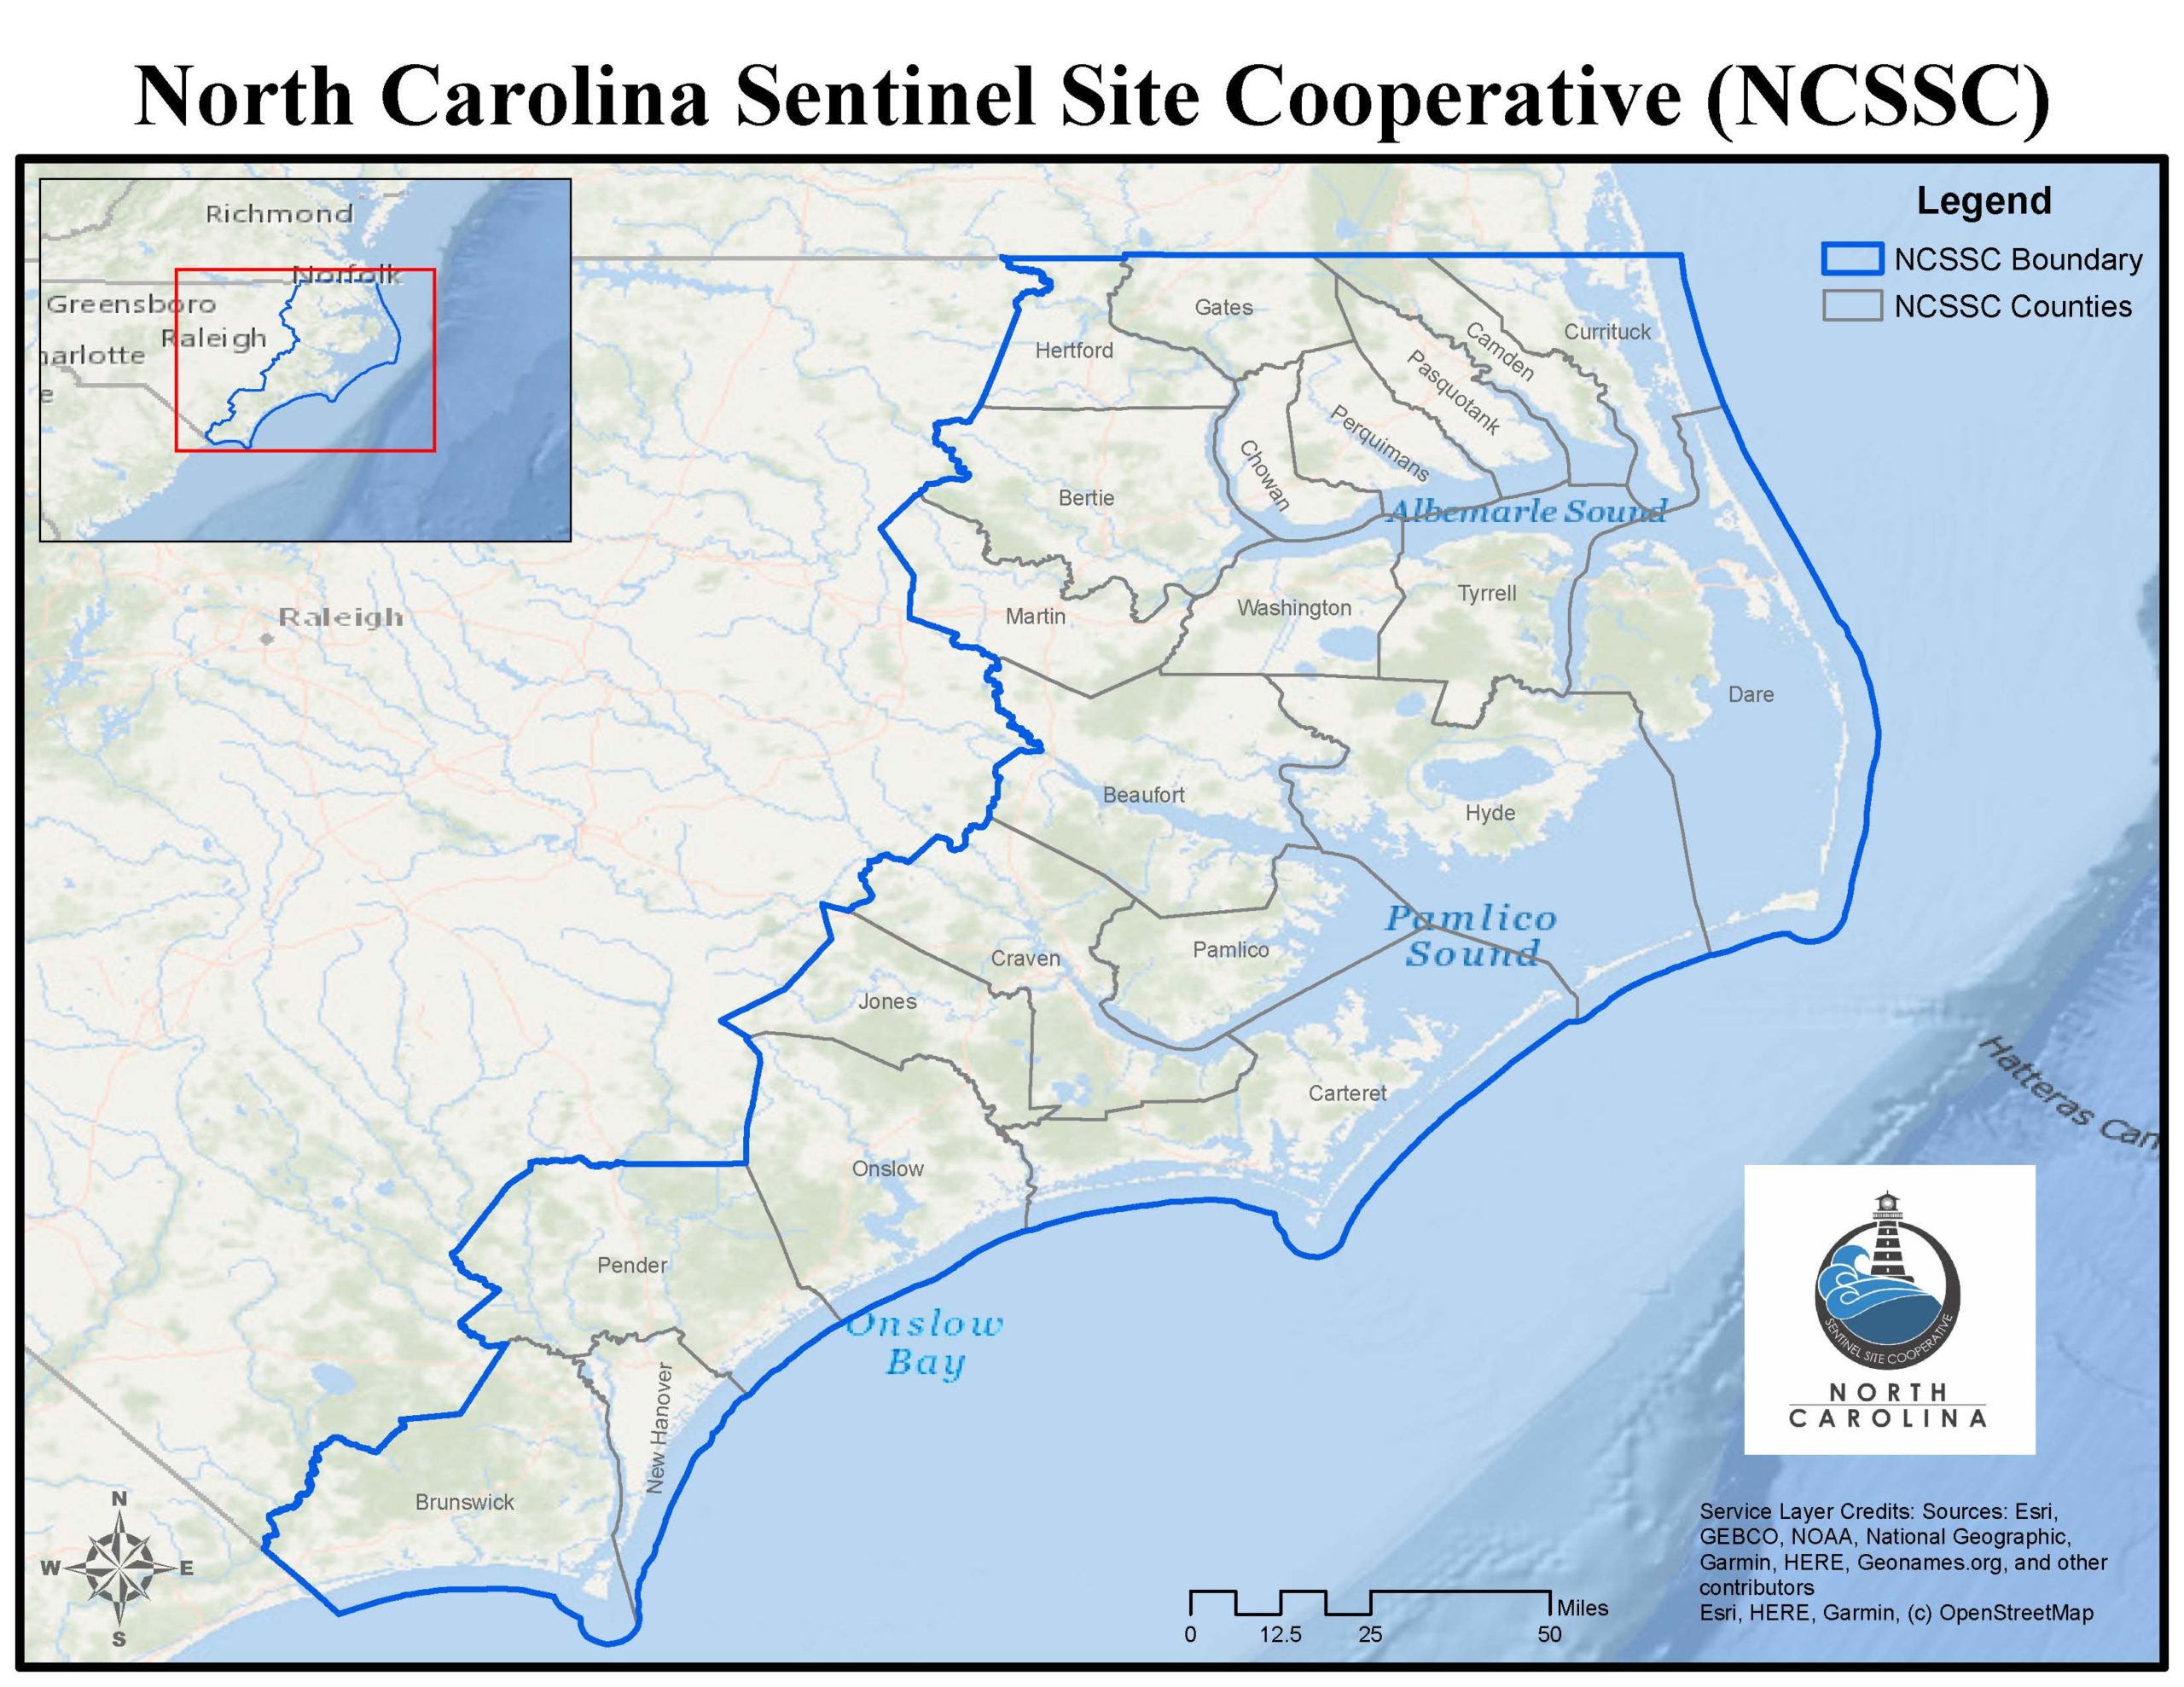 A map of the North Carolina Sentinel Site Cooperative, which includes the 20 counties designated by the N.C. Coastal Area Management Act, plus Jones and Martin counties.